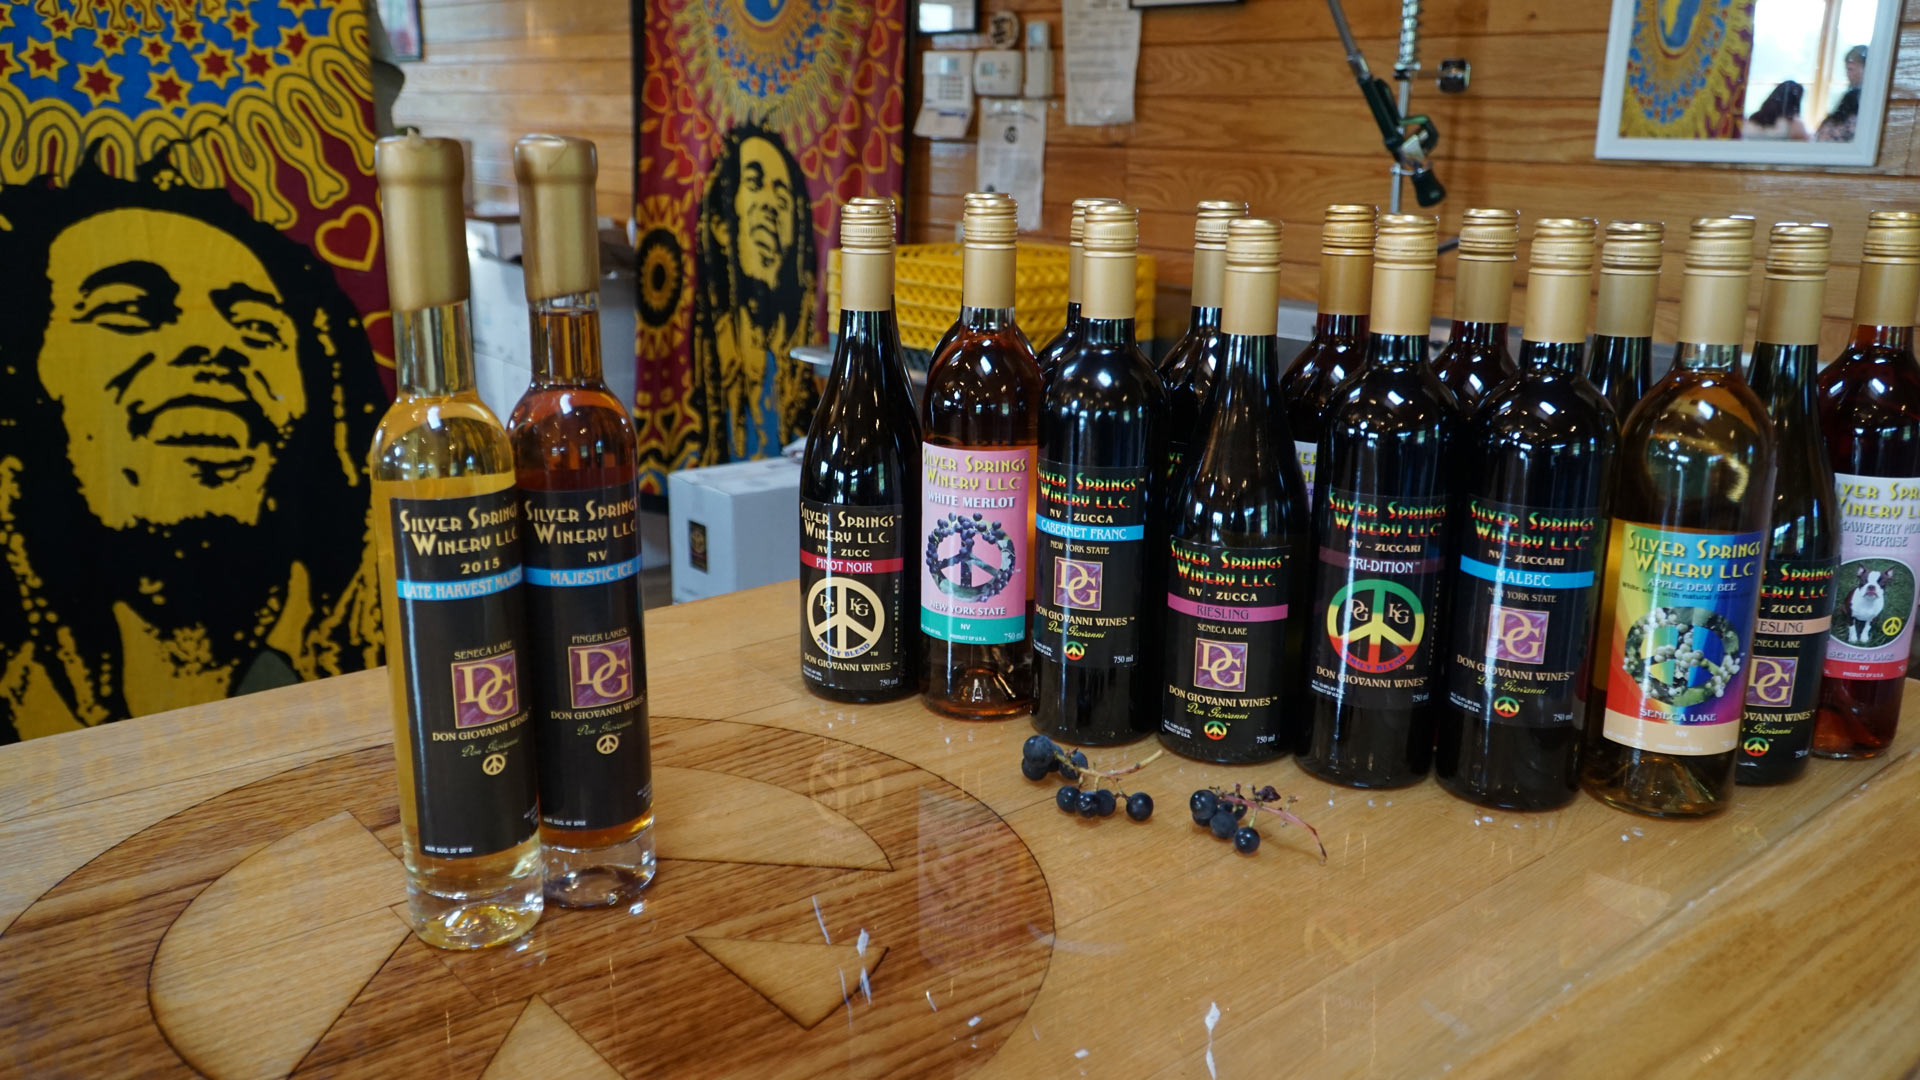 Visit Silver Springs Winery - Pick up some Wine Bottles